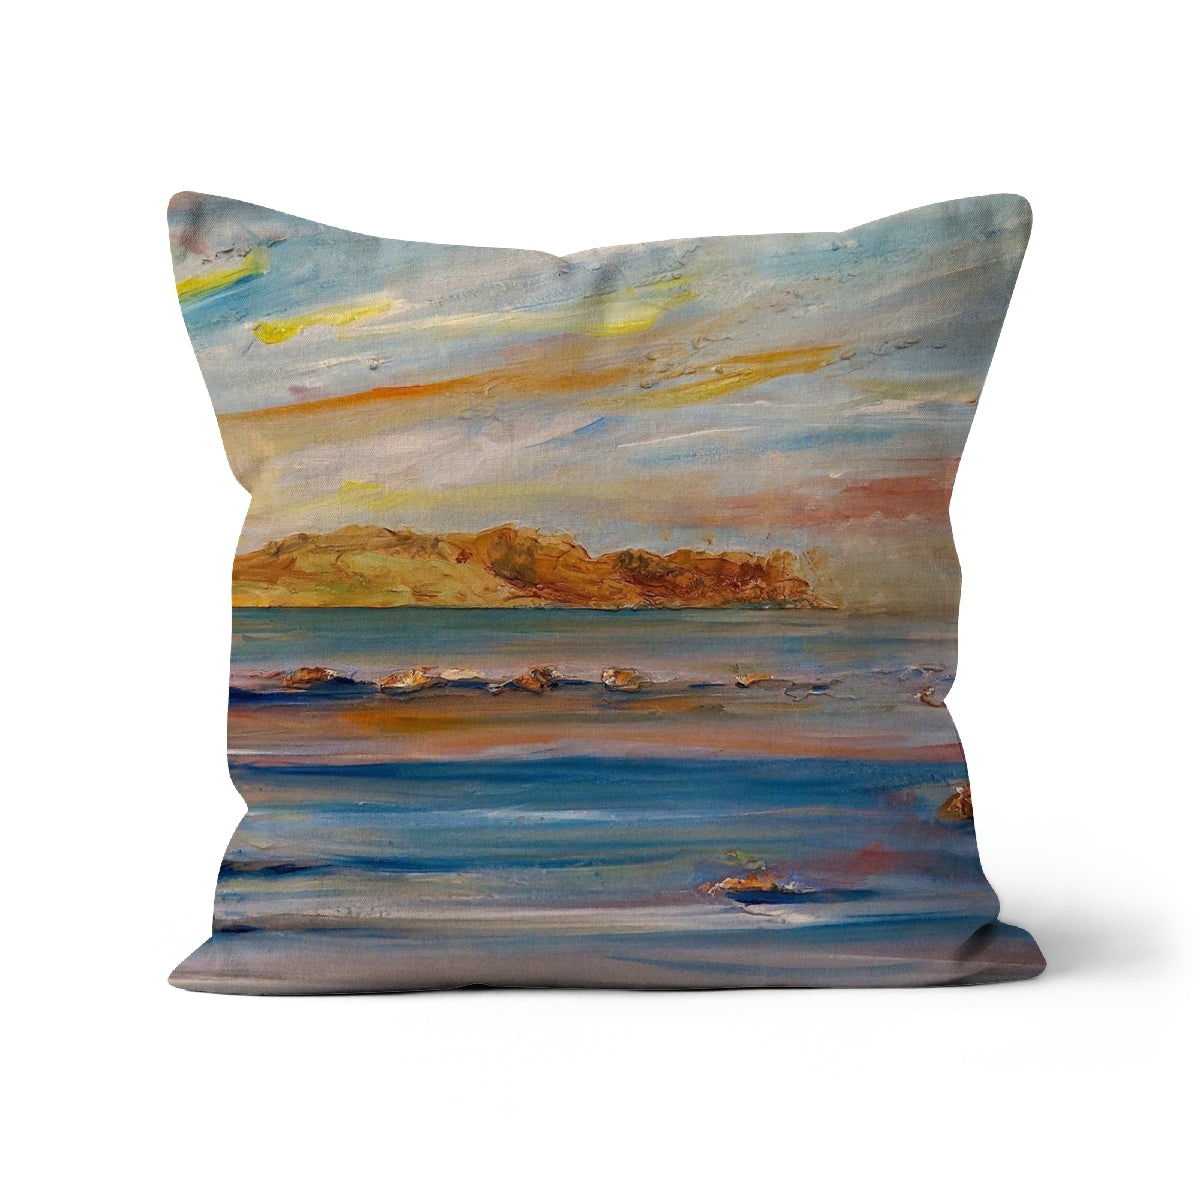 Tiree Dawn Art Gifts Cushion-Cushions-Hebridean Islands Art Gallery-Faux Suede-24"x24"-Paintings, Prints, Homeware, Art Gifts From Scotland By Scottish Artist Kevin Hunter